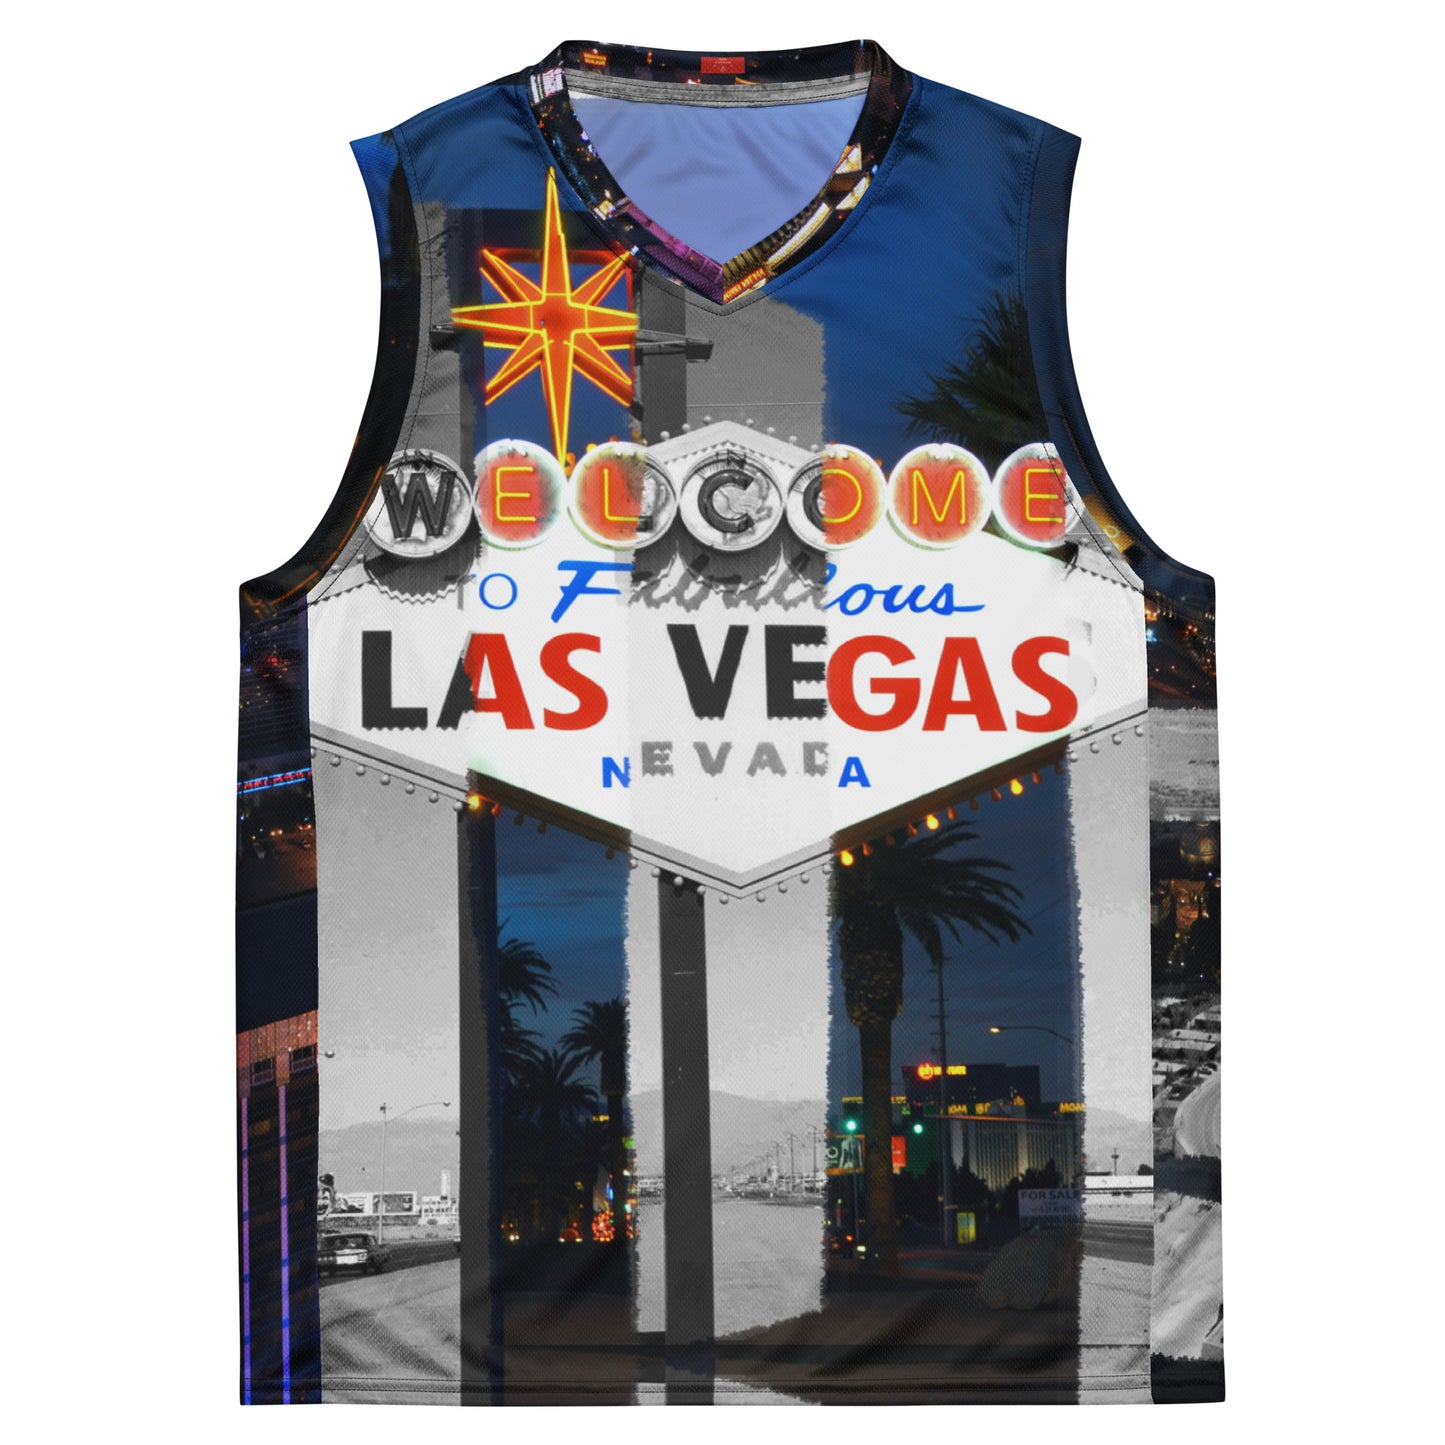 Las Vegas KiSS Recycled unisex basketball jersey - Then and Now history